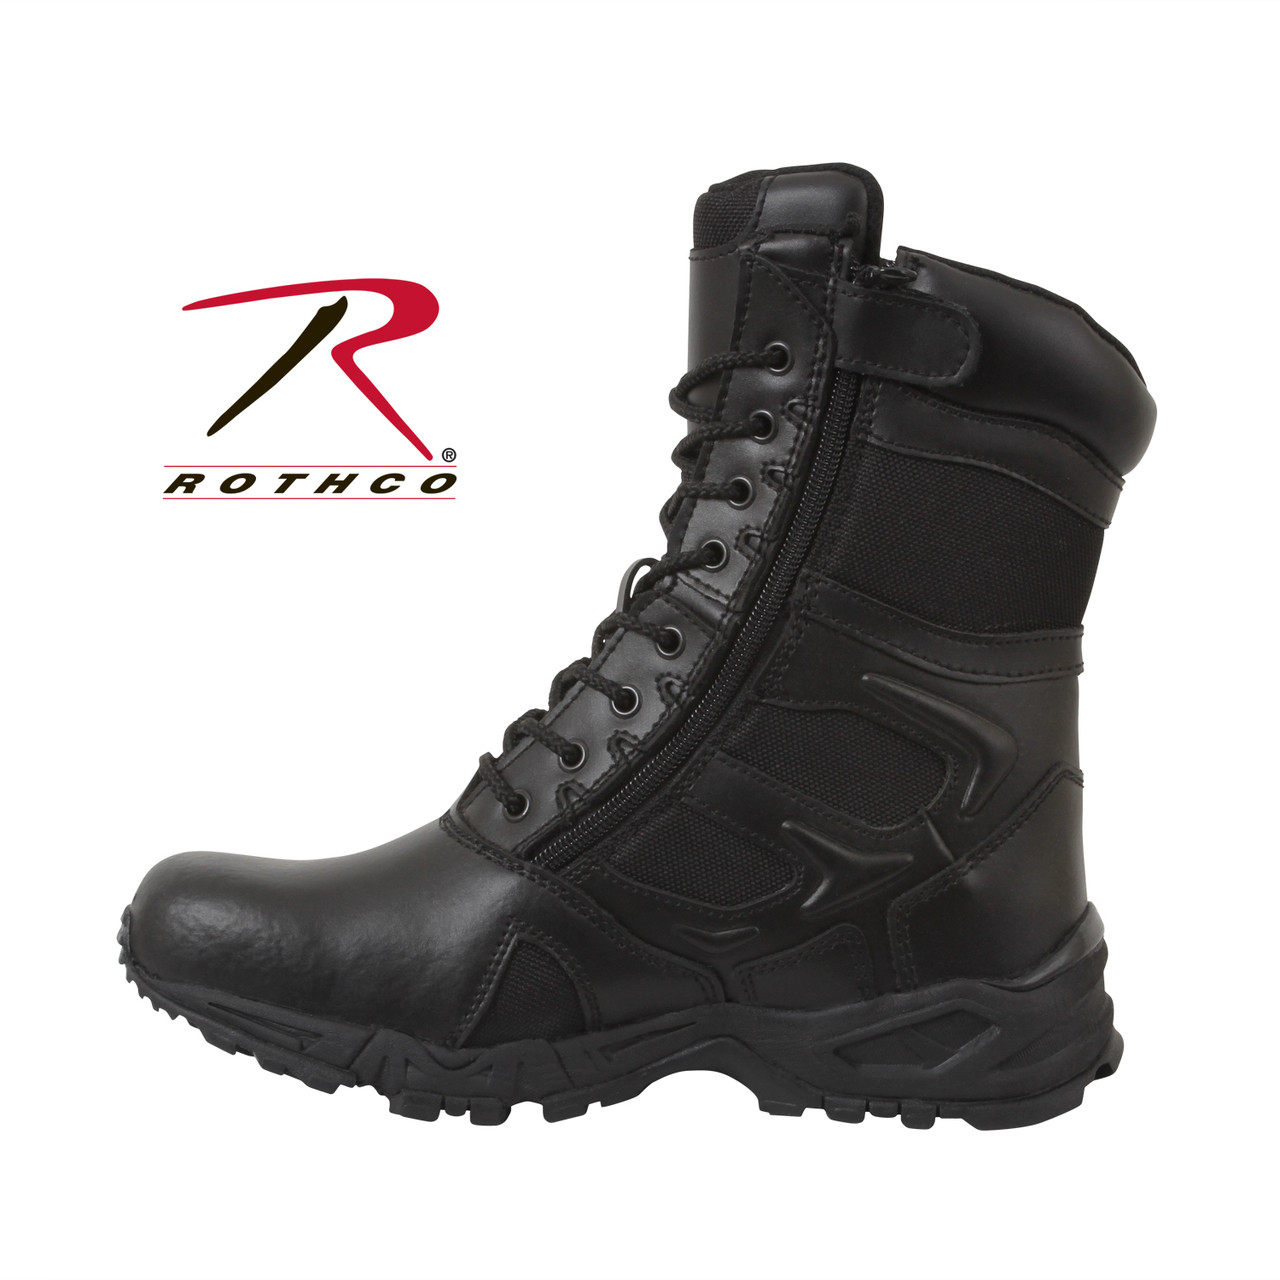 Rothco Forced Entry Deployment Boot with Side Zipper 8